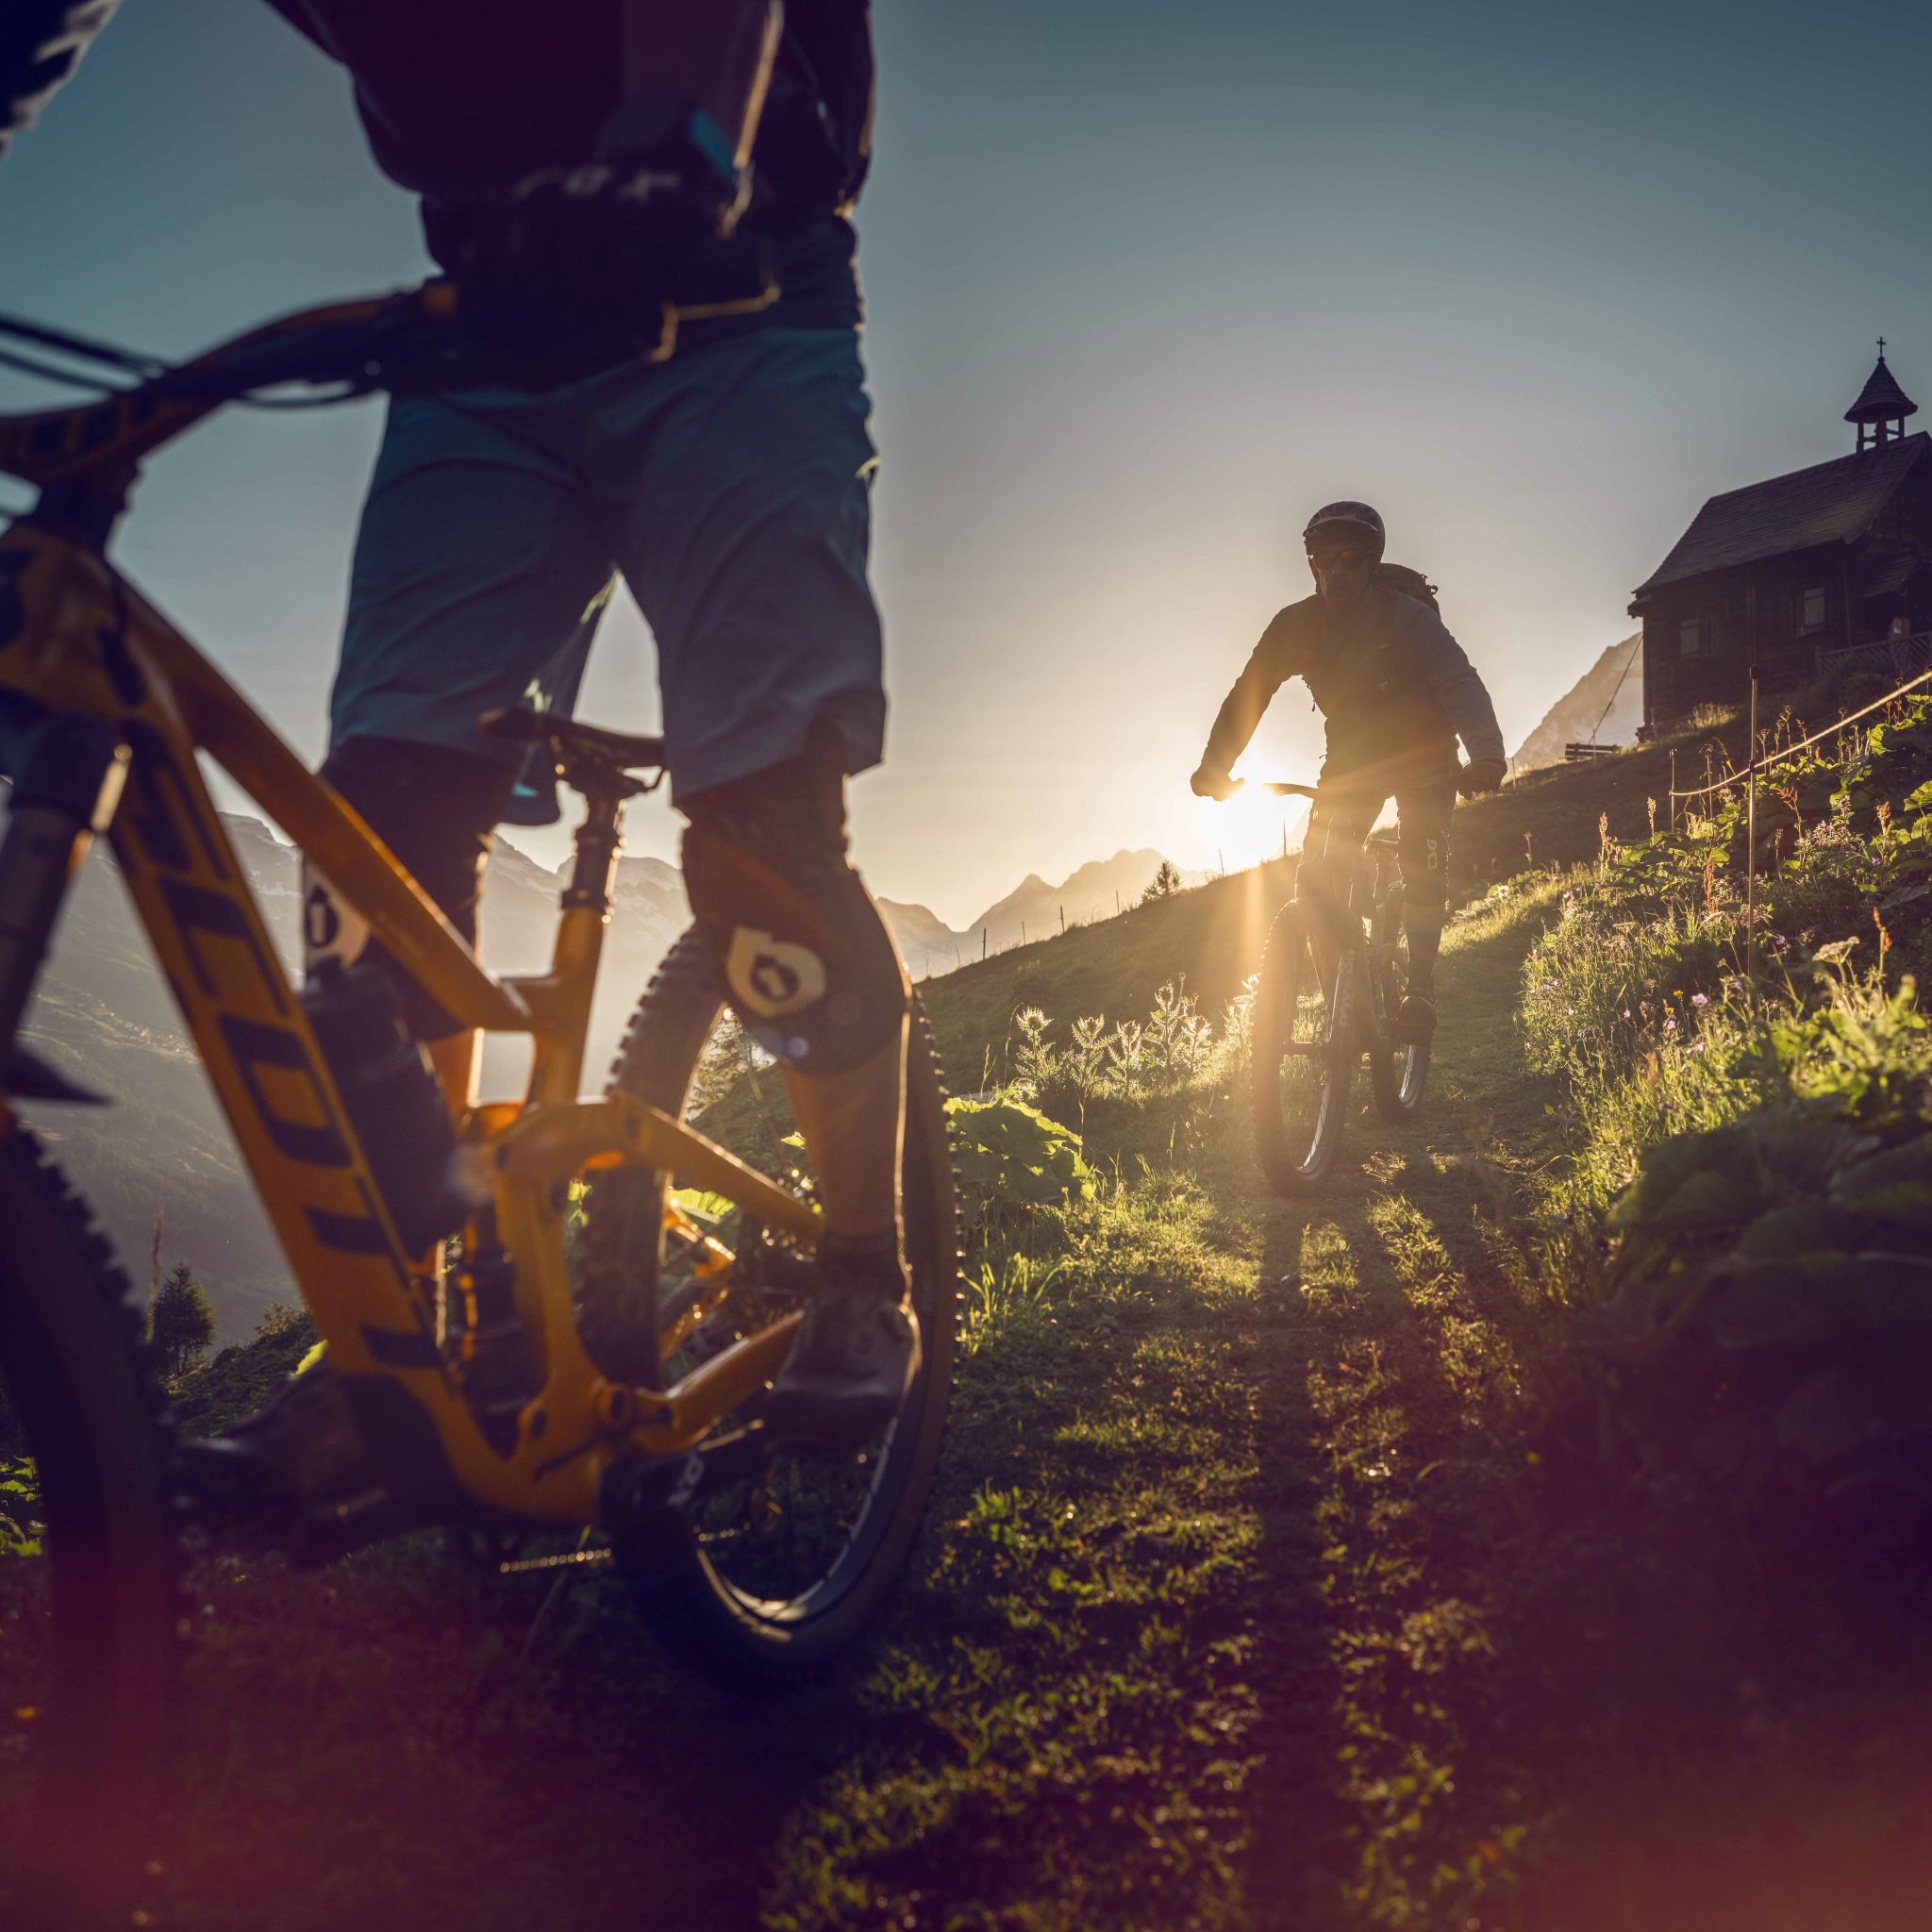 Two mountain bikers finish their day of mountain biking with a setting sun in the Lötschental. Valais, Switzerland